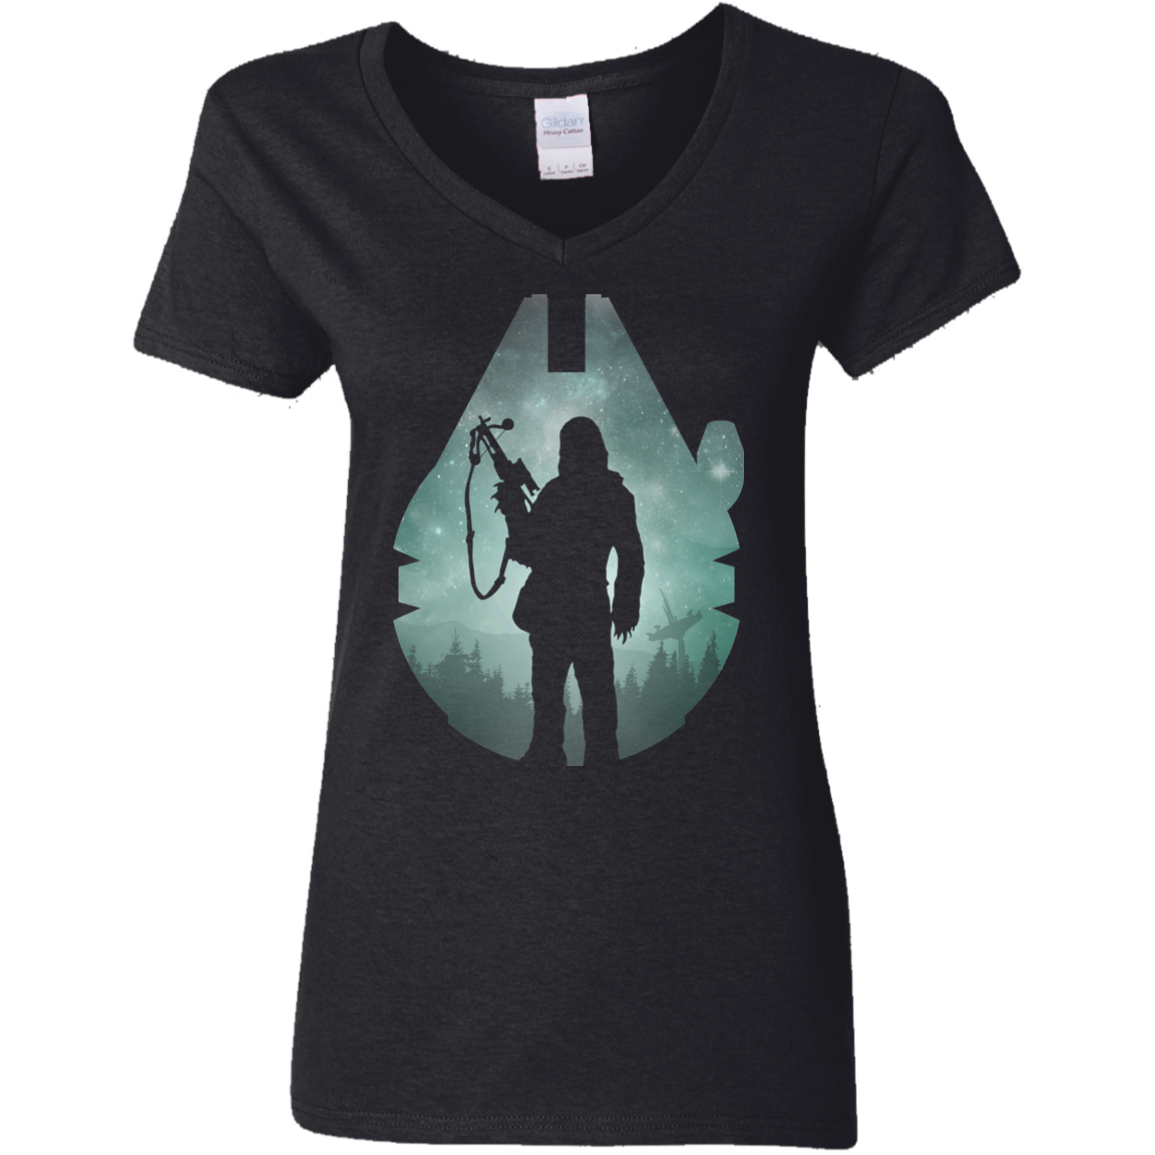 The Wookiee Women's V-Neck T-Shirt